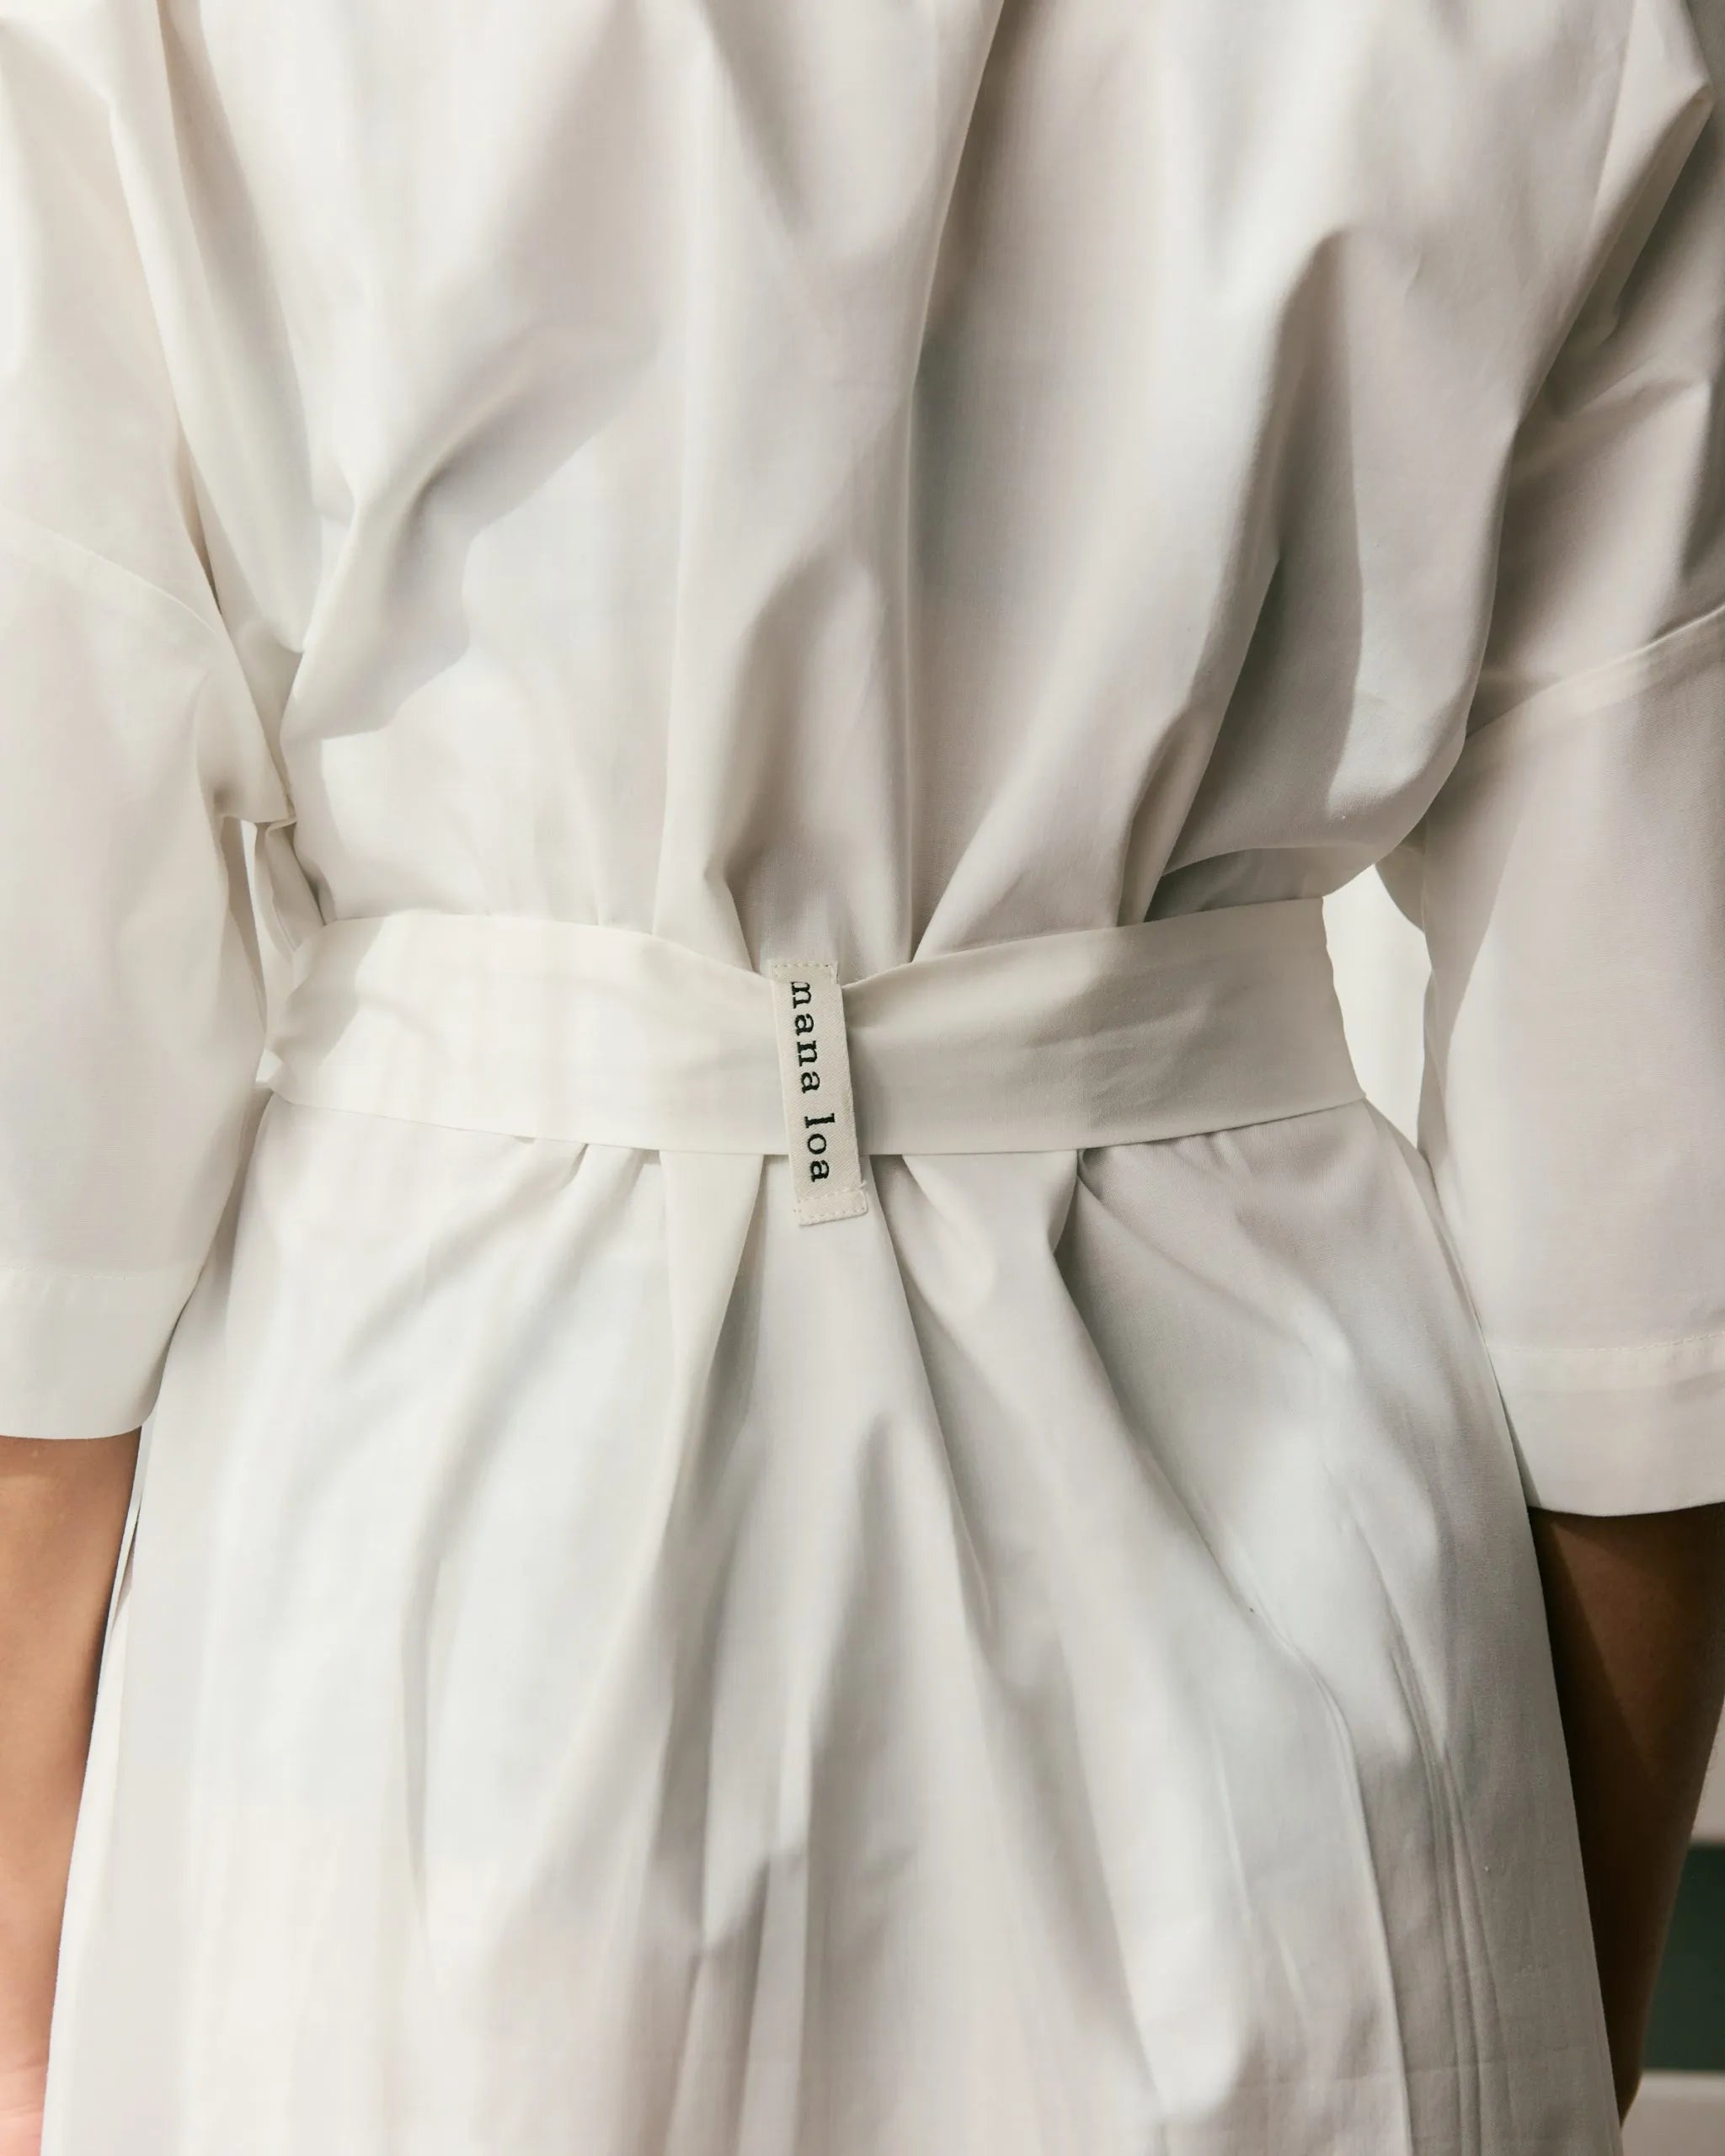 Detail of the back of an off-white organic cotton dress with a belt and the mana loa label.